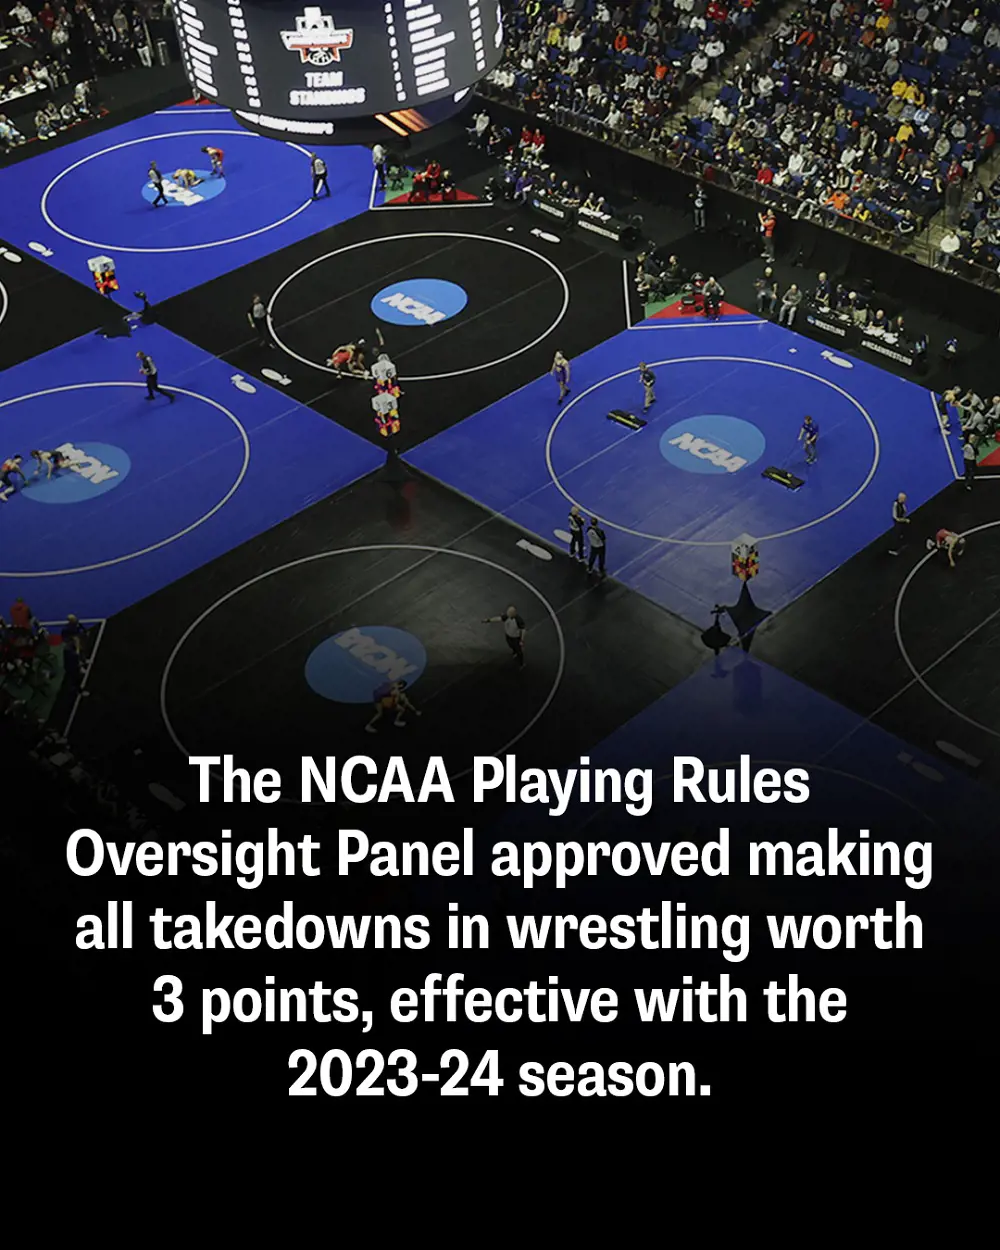 The new rule are exciting and will come into effect from the 2023-24 season